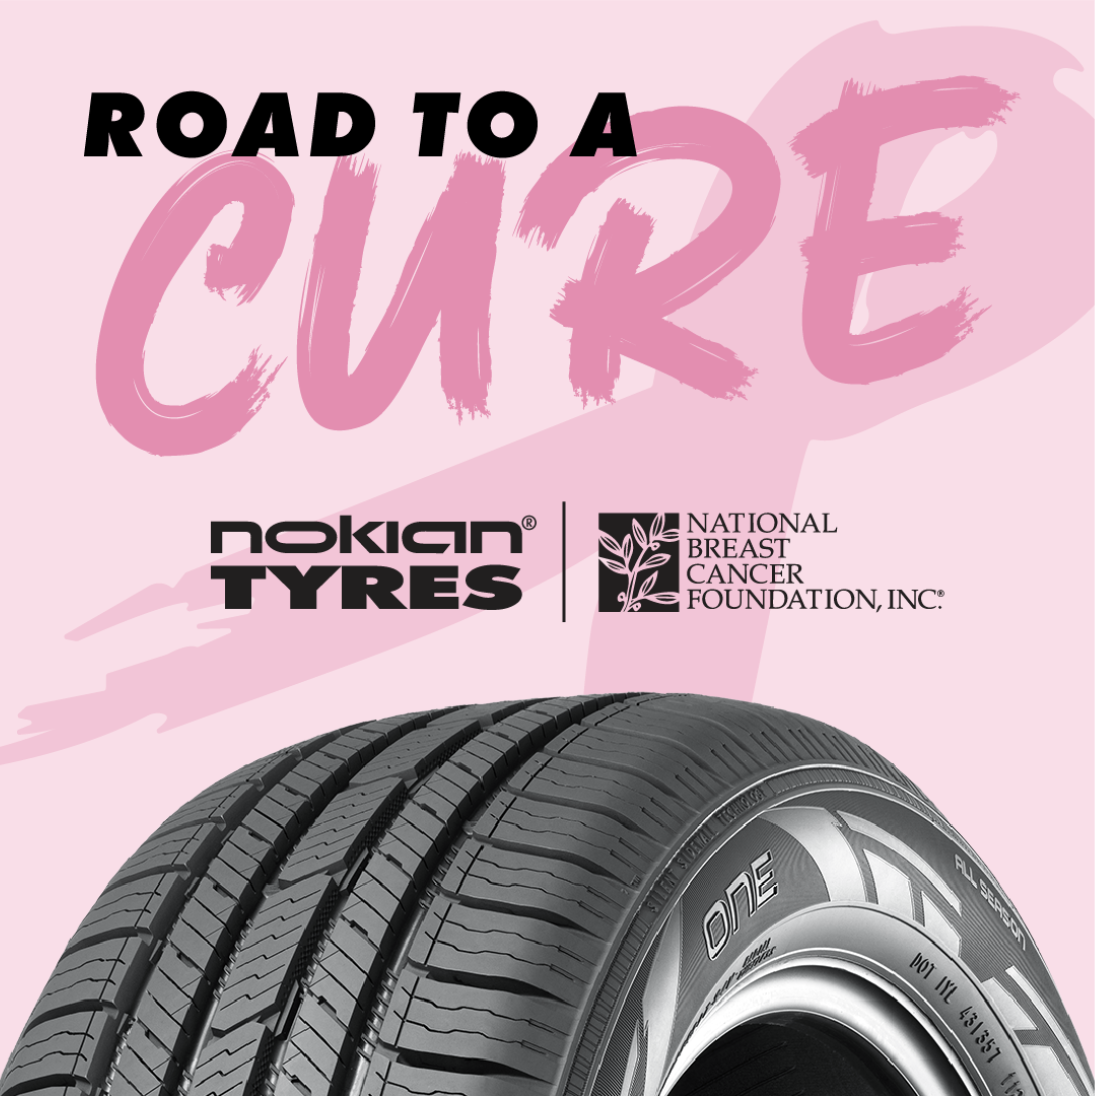 ROAD TO A CURE